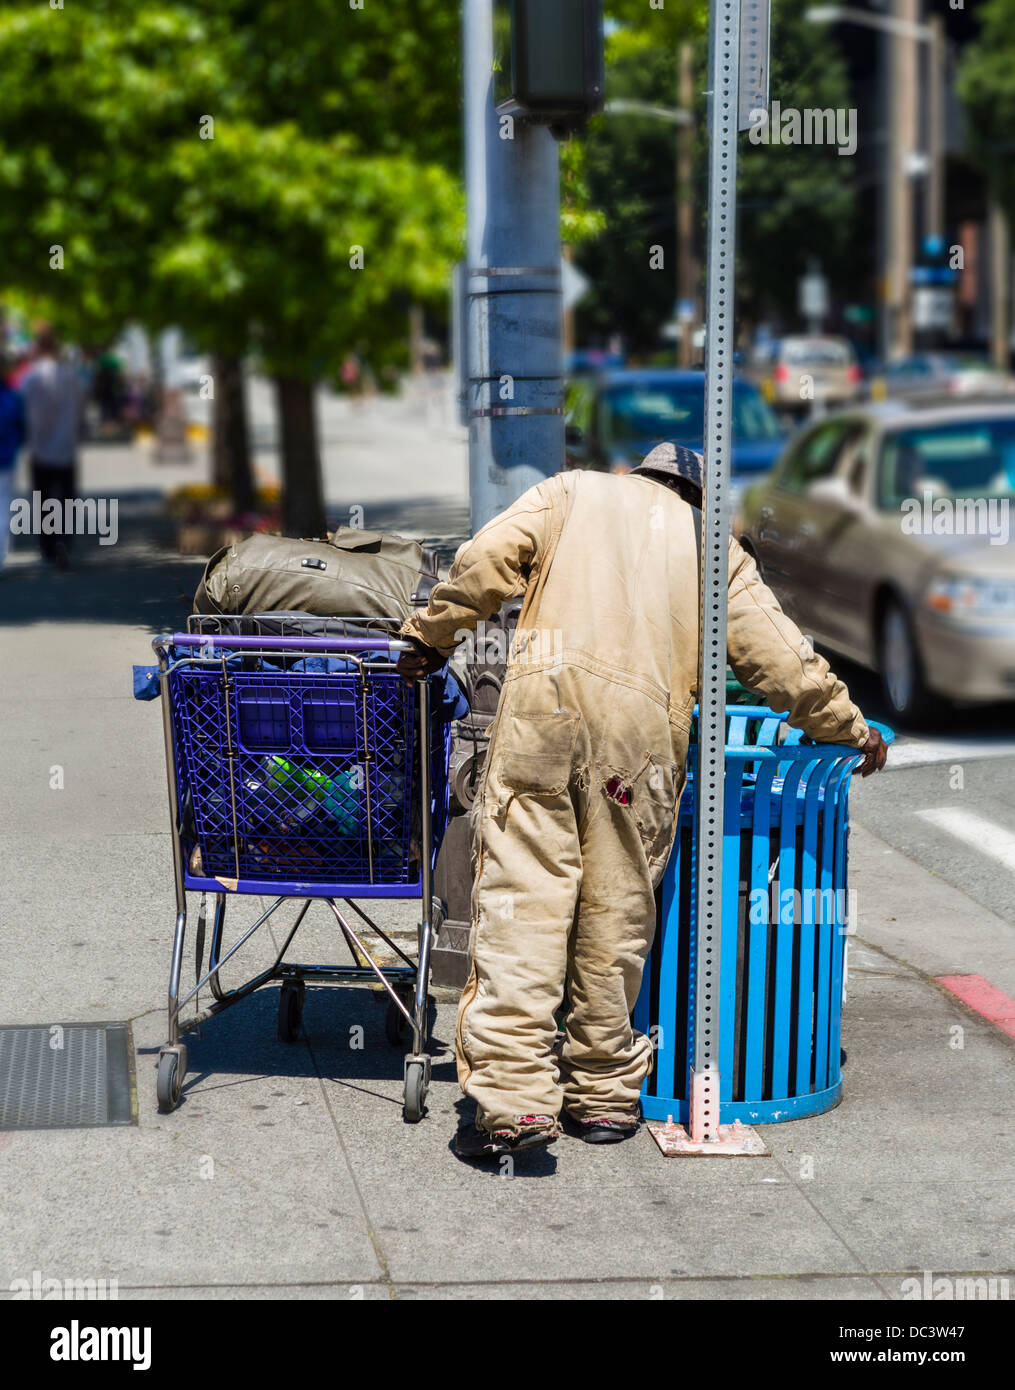 homeless-man-with-a-shopping-cart-scavenging-in-a-trash-can-seattle-DC3W47.jpg